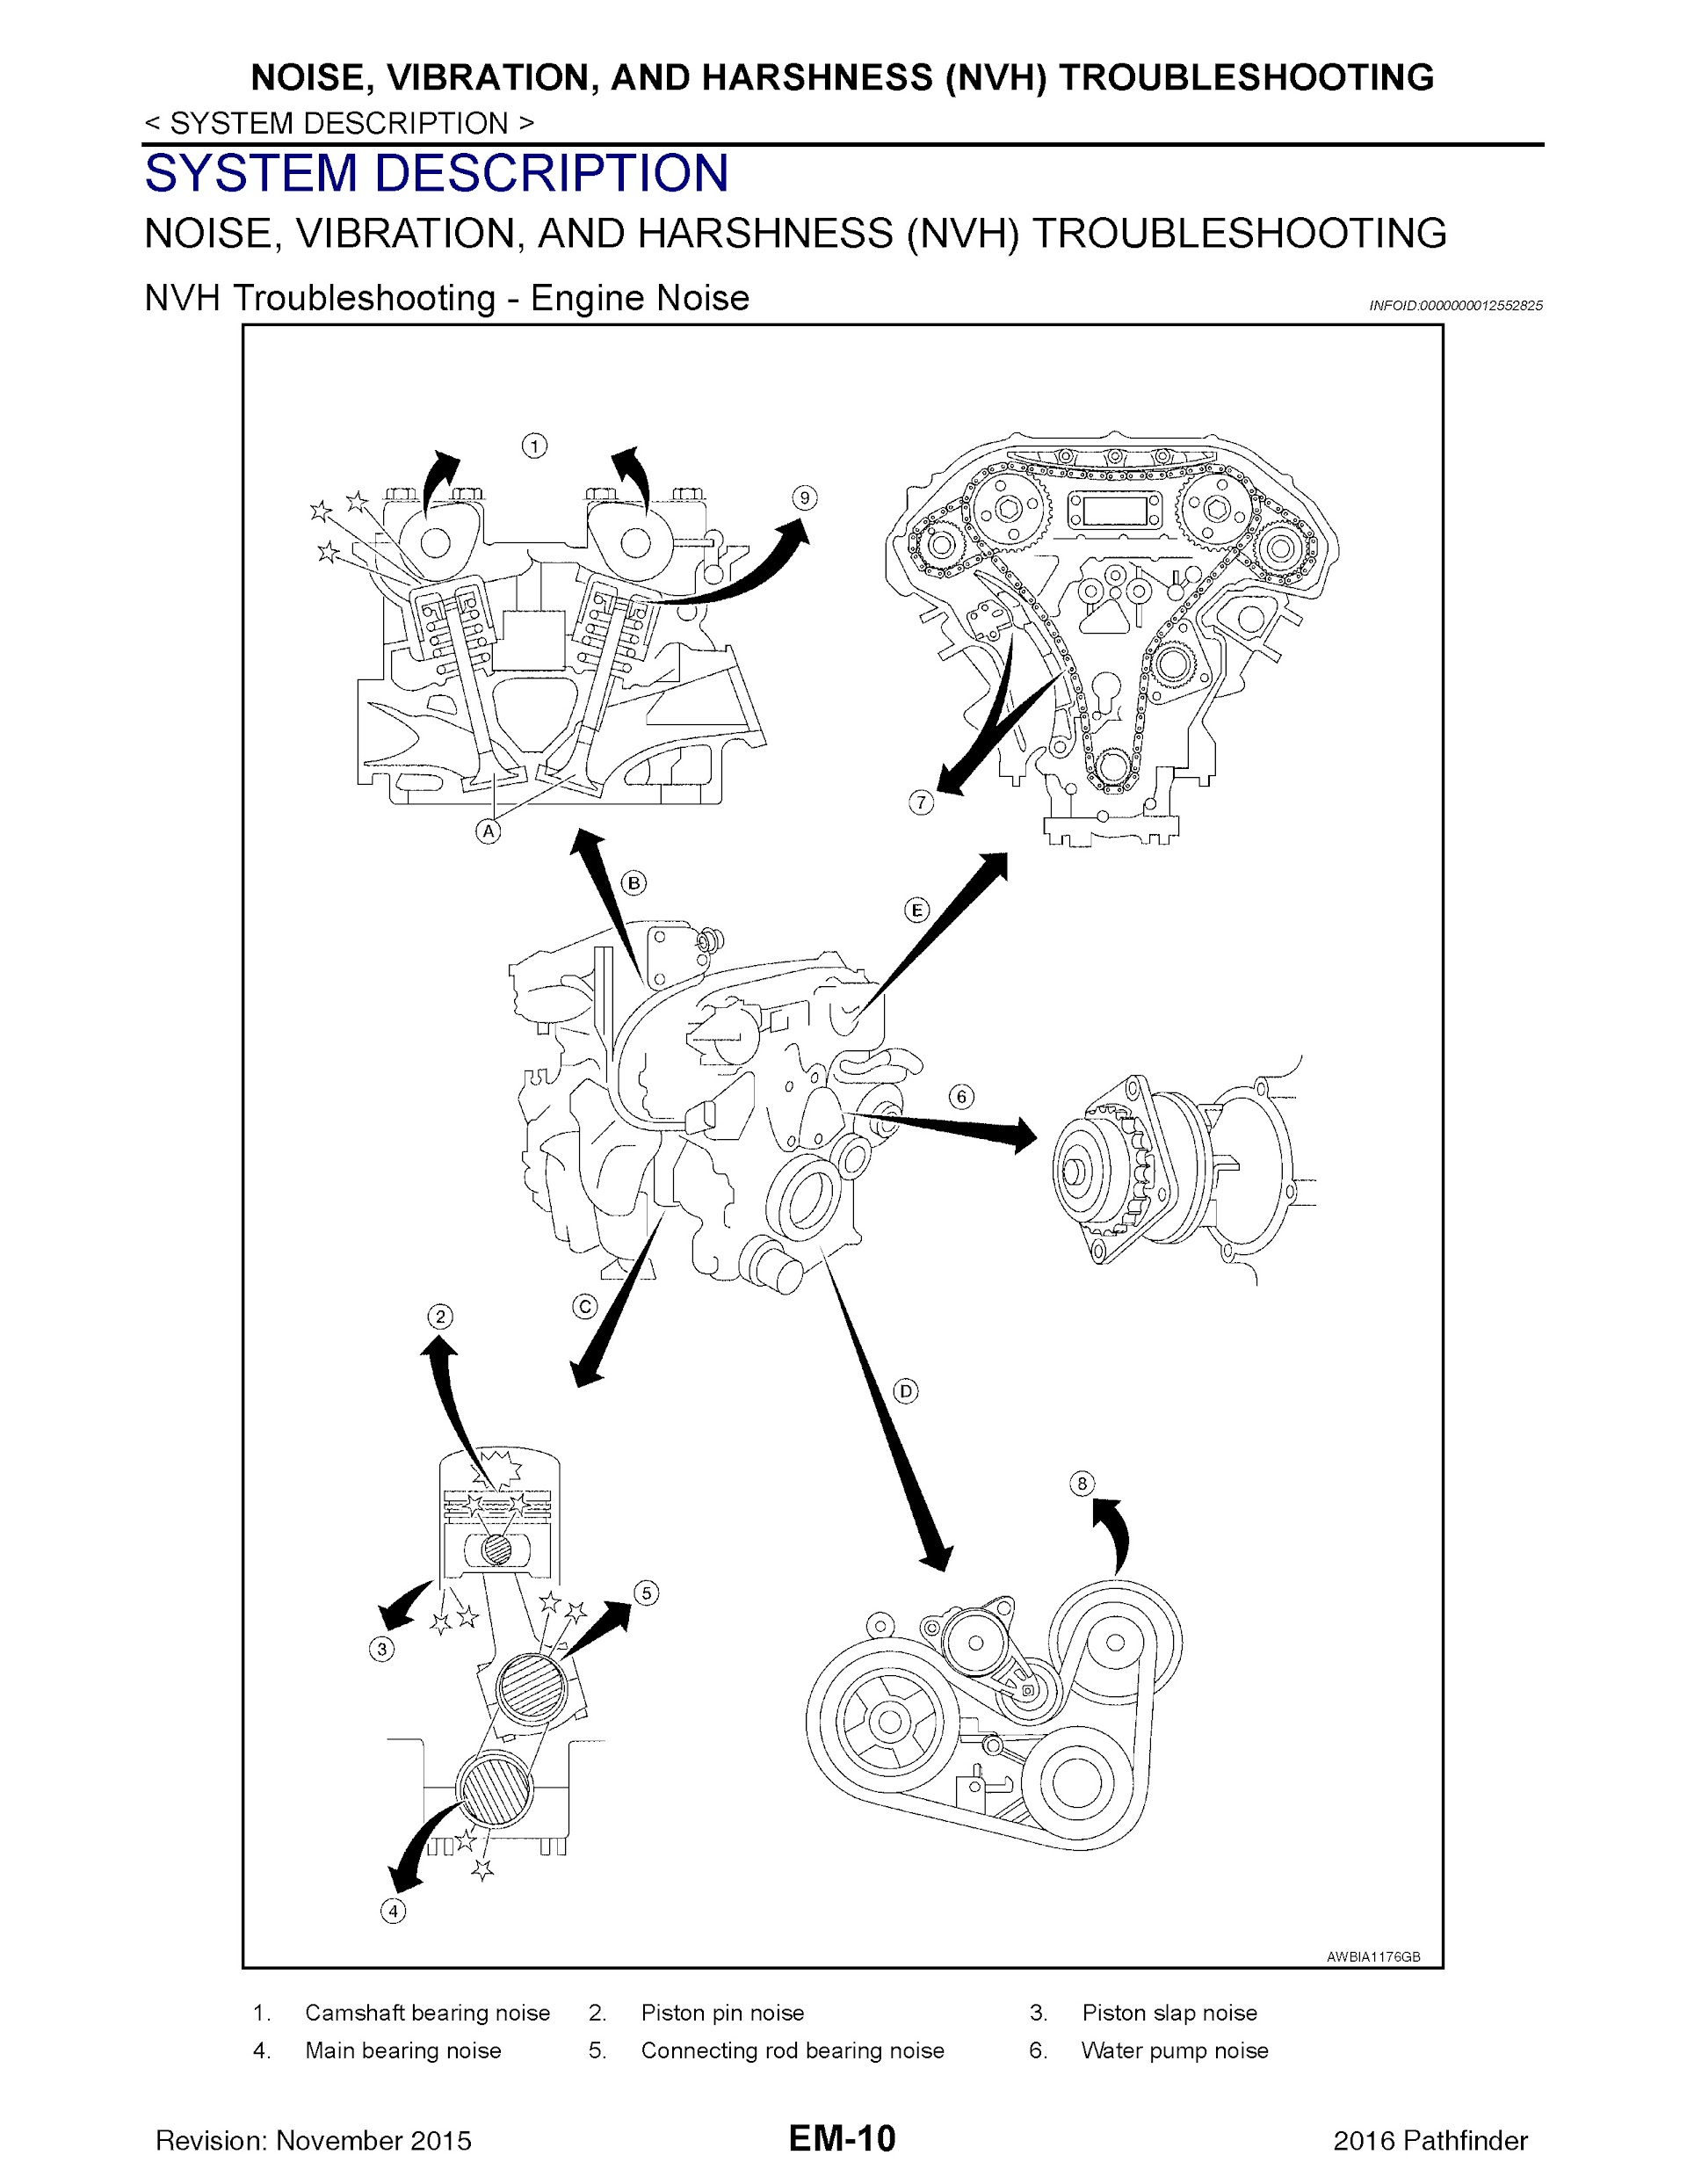 2016 Nissan Pathfinder Repair Manual, Noise, Vibration and Harshness Troubleshooting